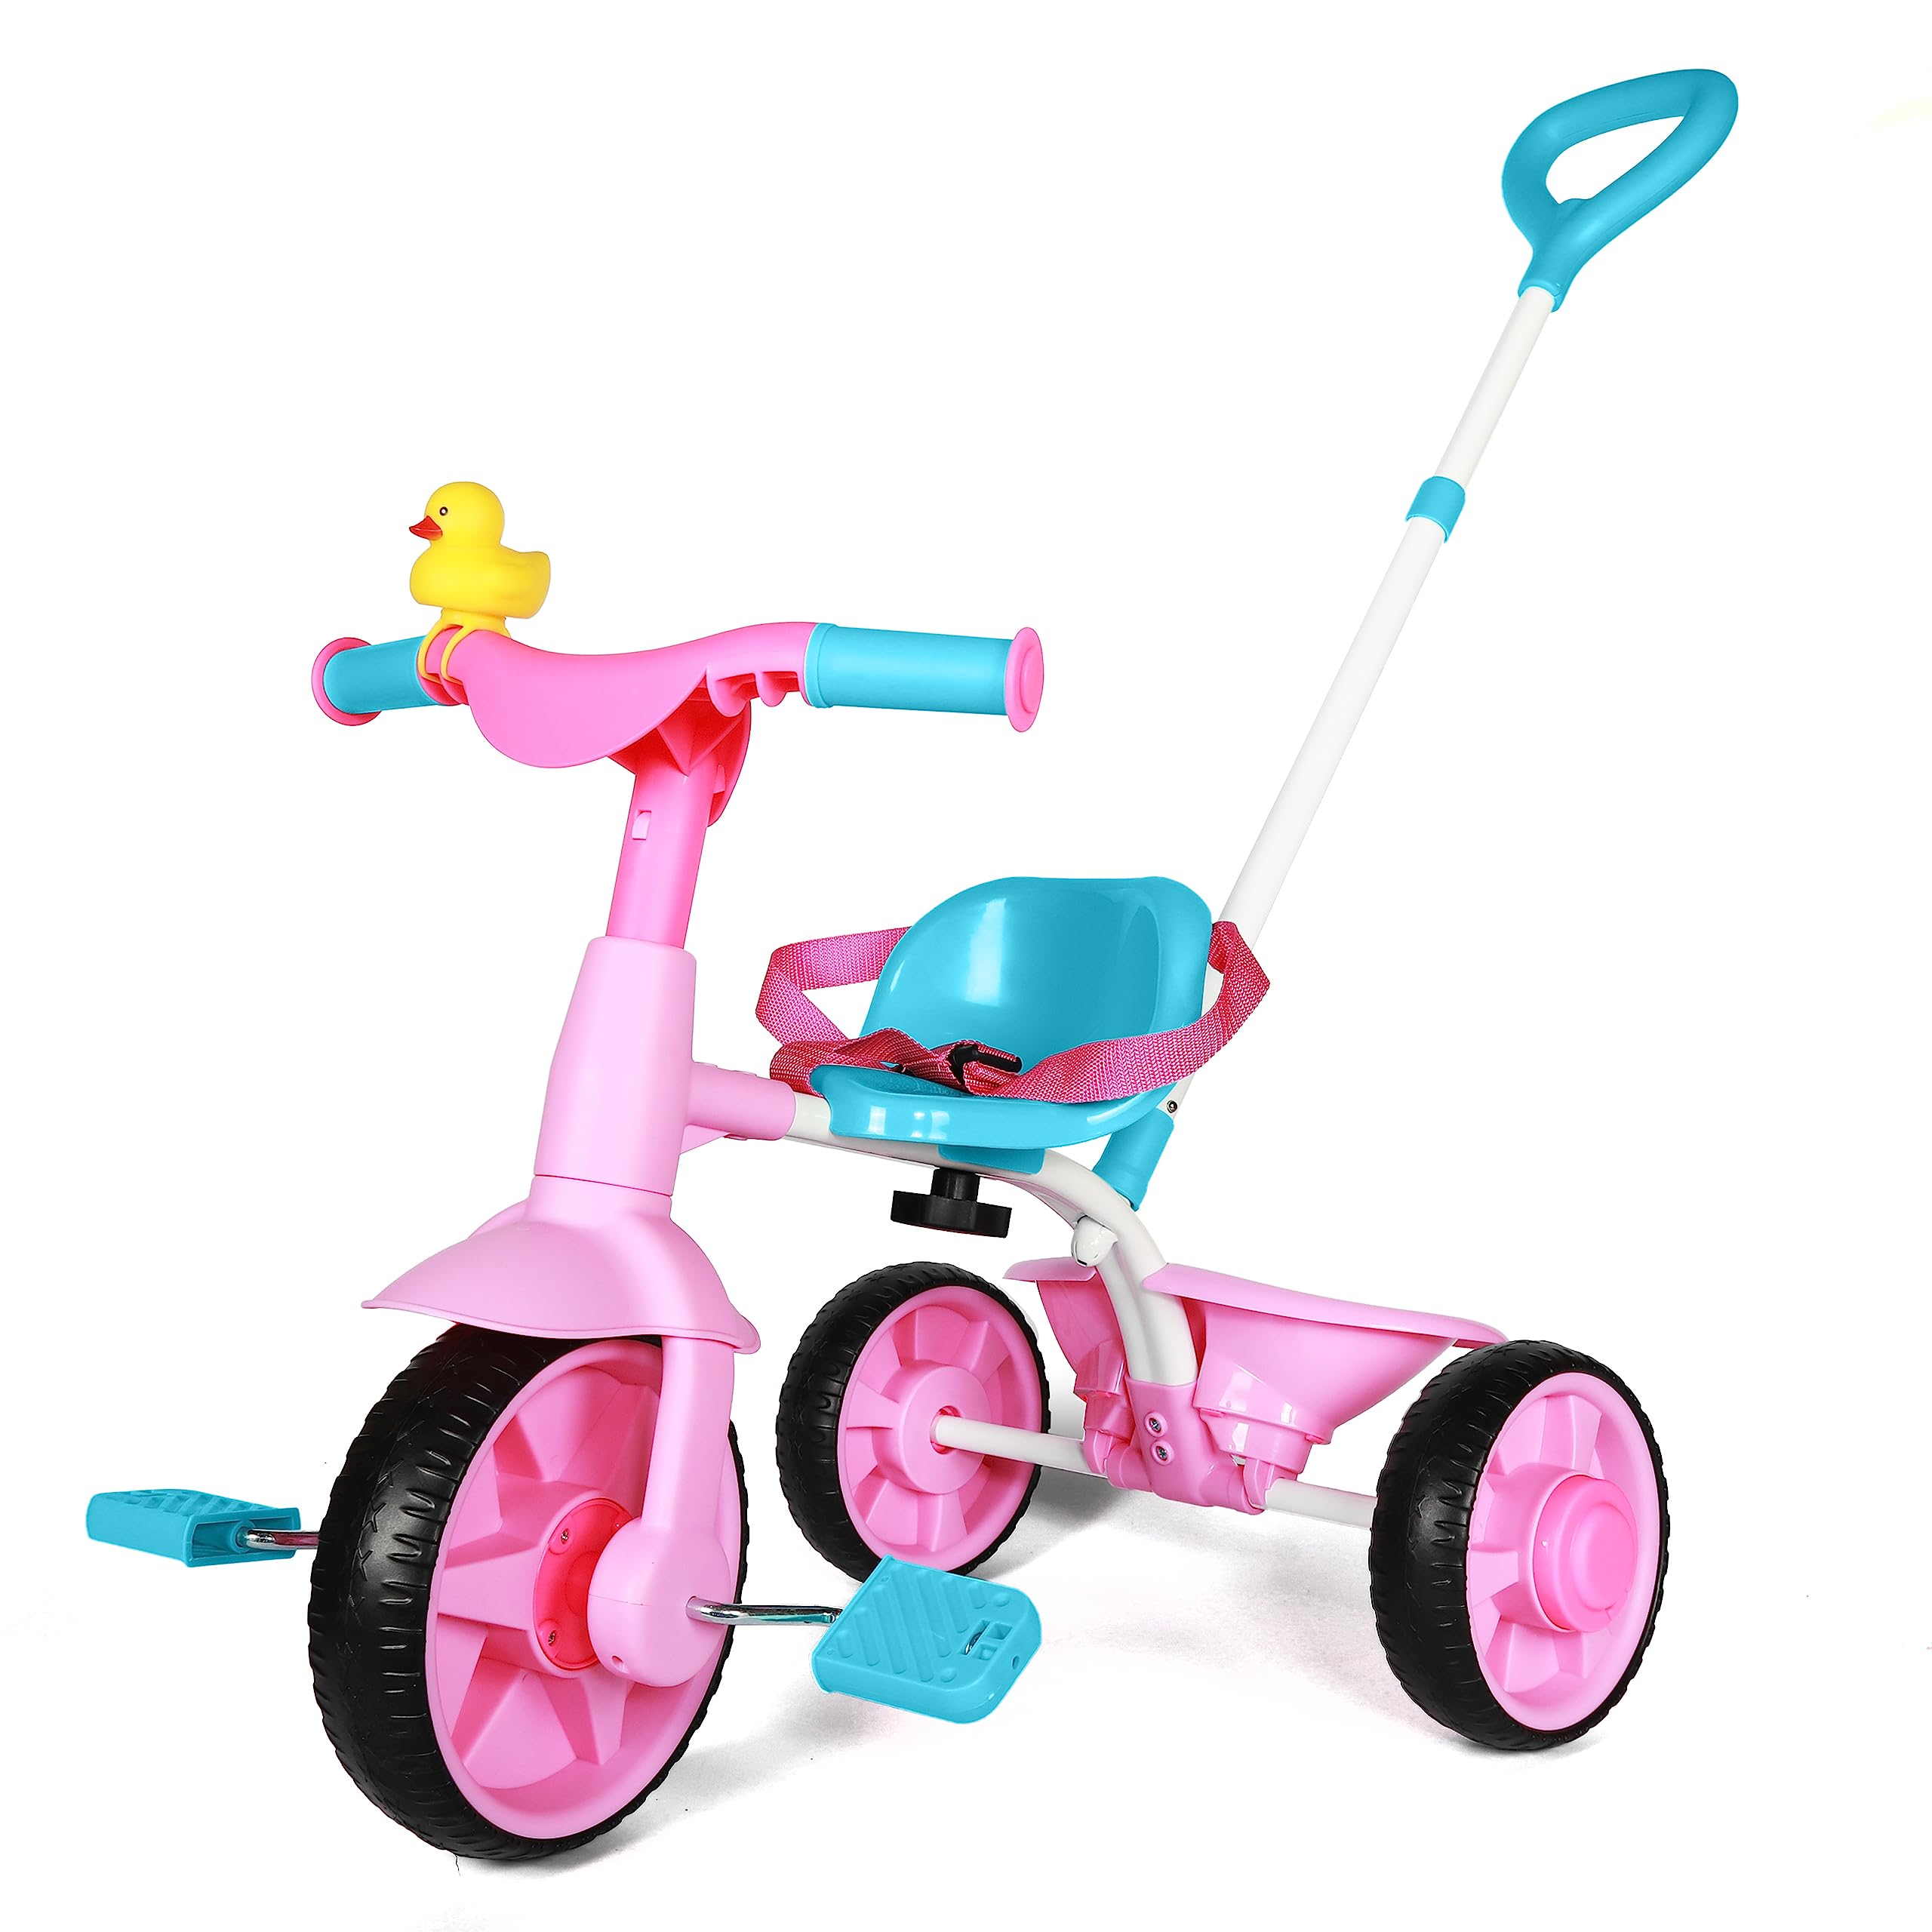 KRIDDO 2 in 1 Kids Tricycles Age 18 Month to 3 Years, EVA Wheels Upgraded Trikes Gift for Toddlers 2 to 3 Year Old with Push Handle and Duck Bell, Pink